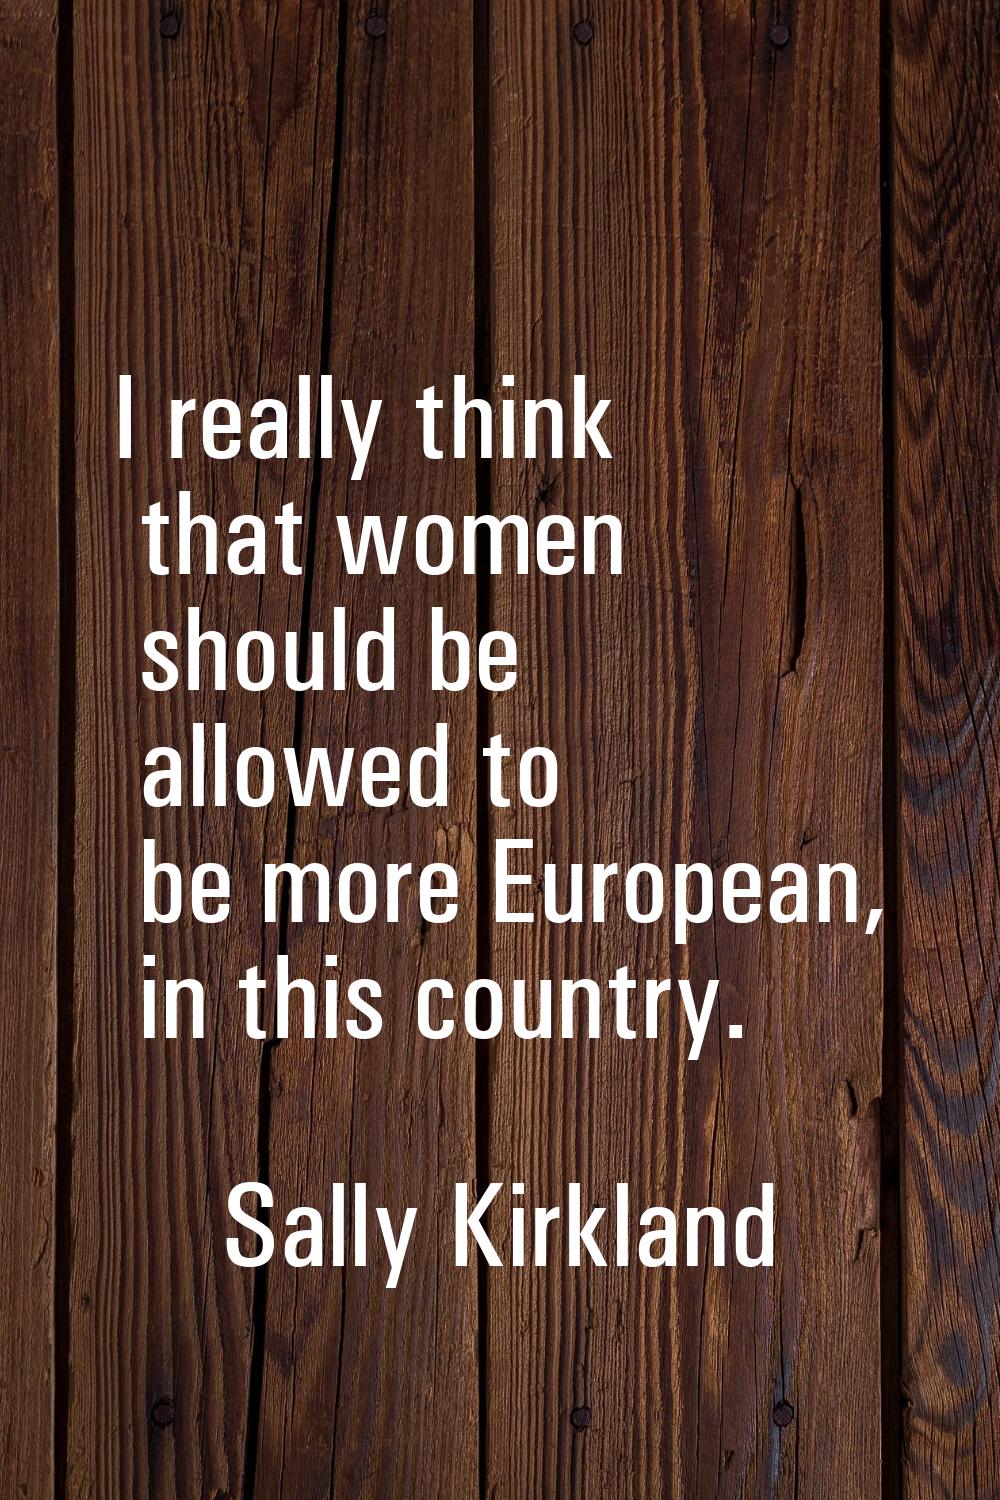 I really think that women should be allowed to be more European, in this country.